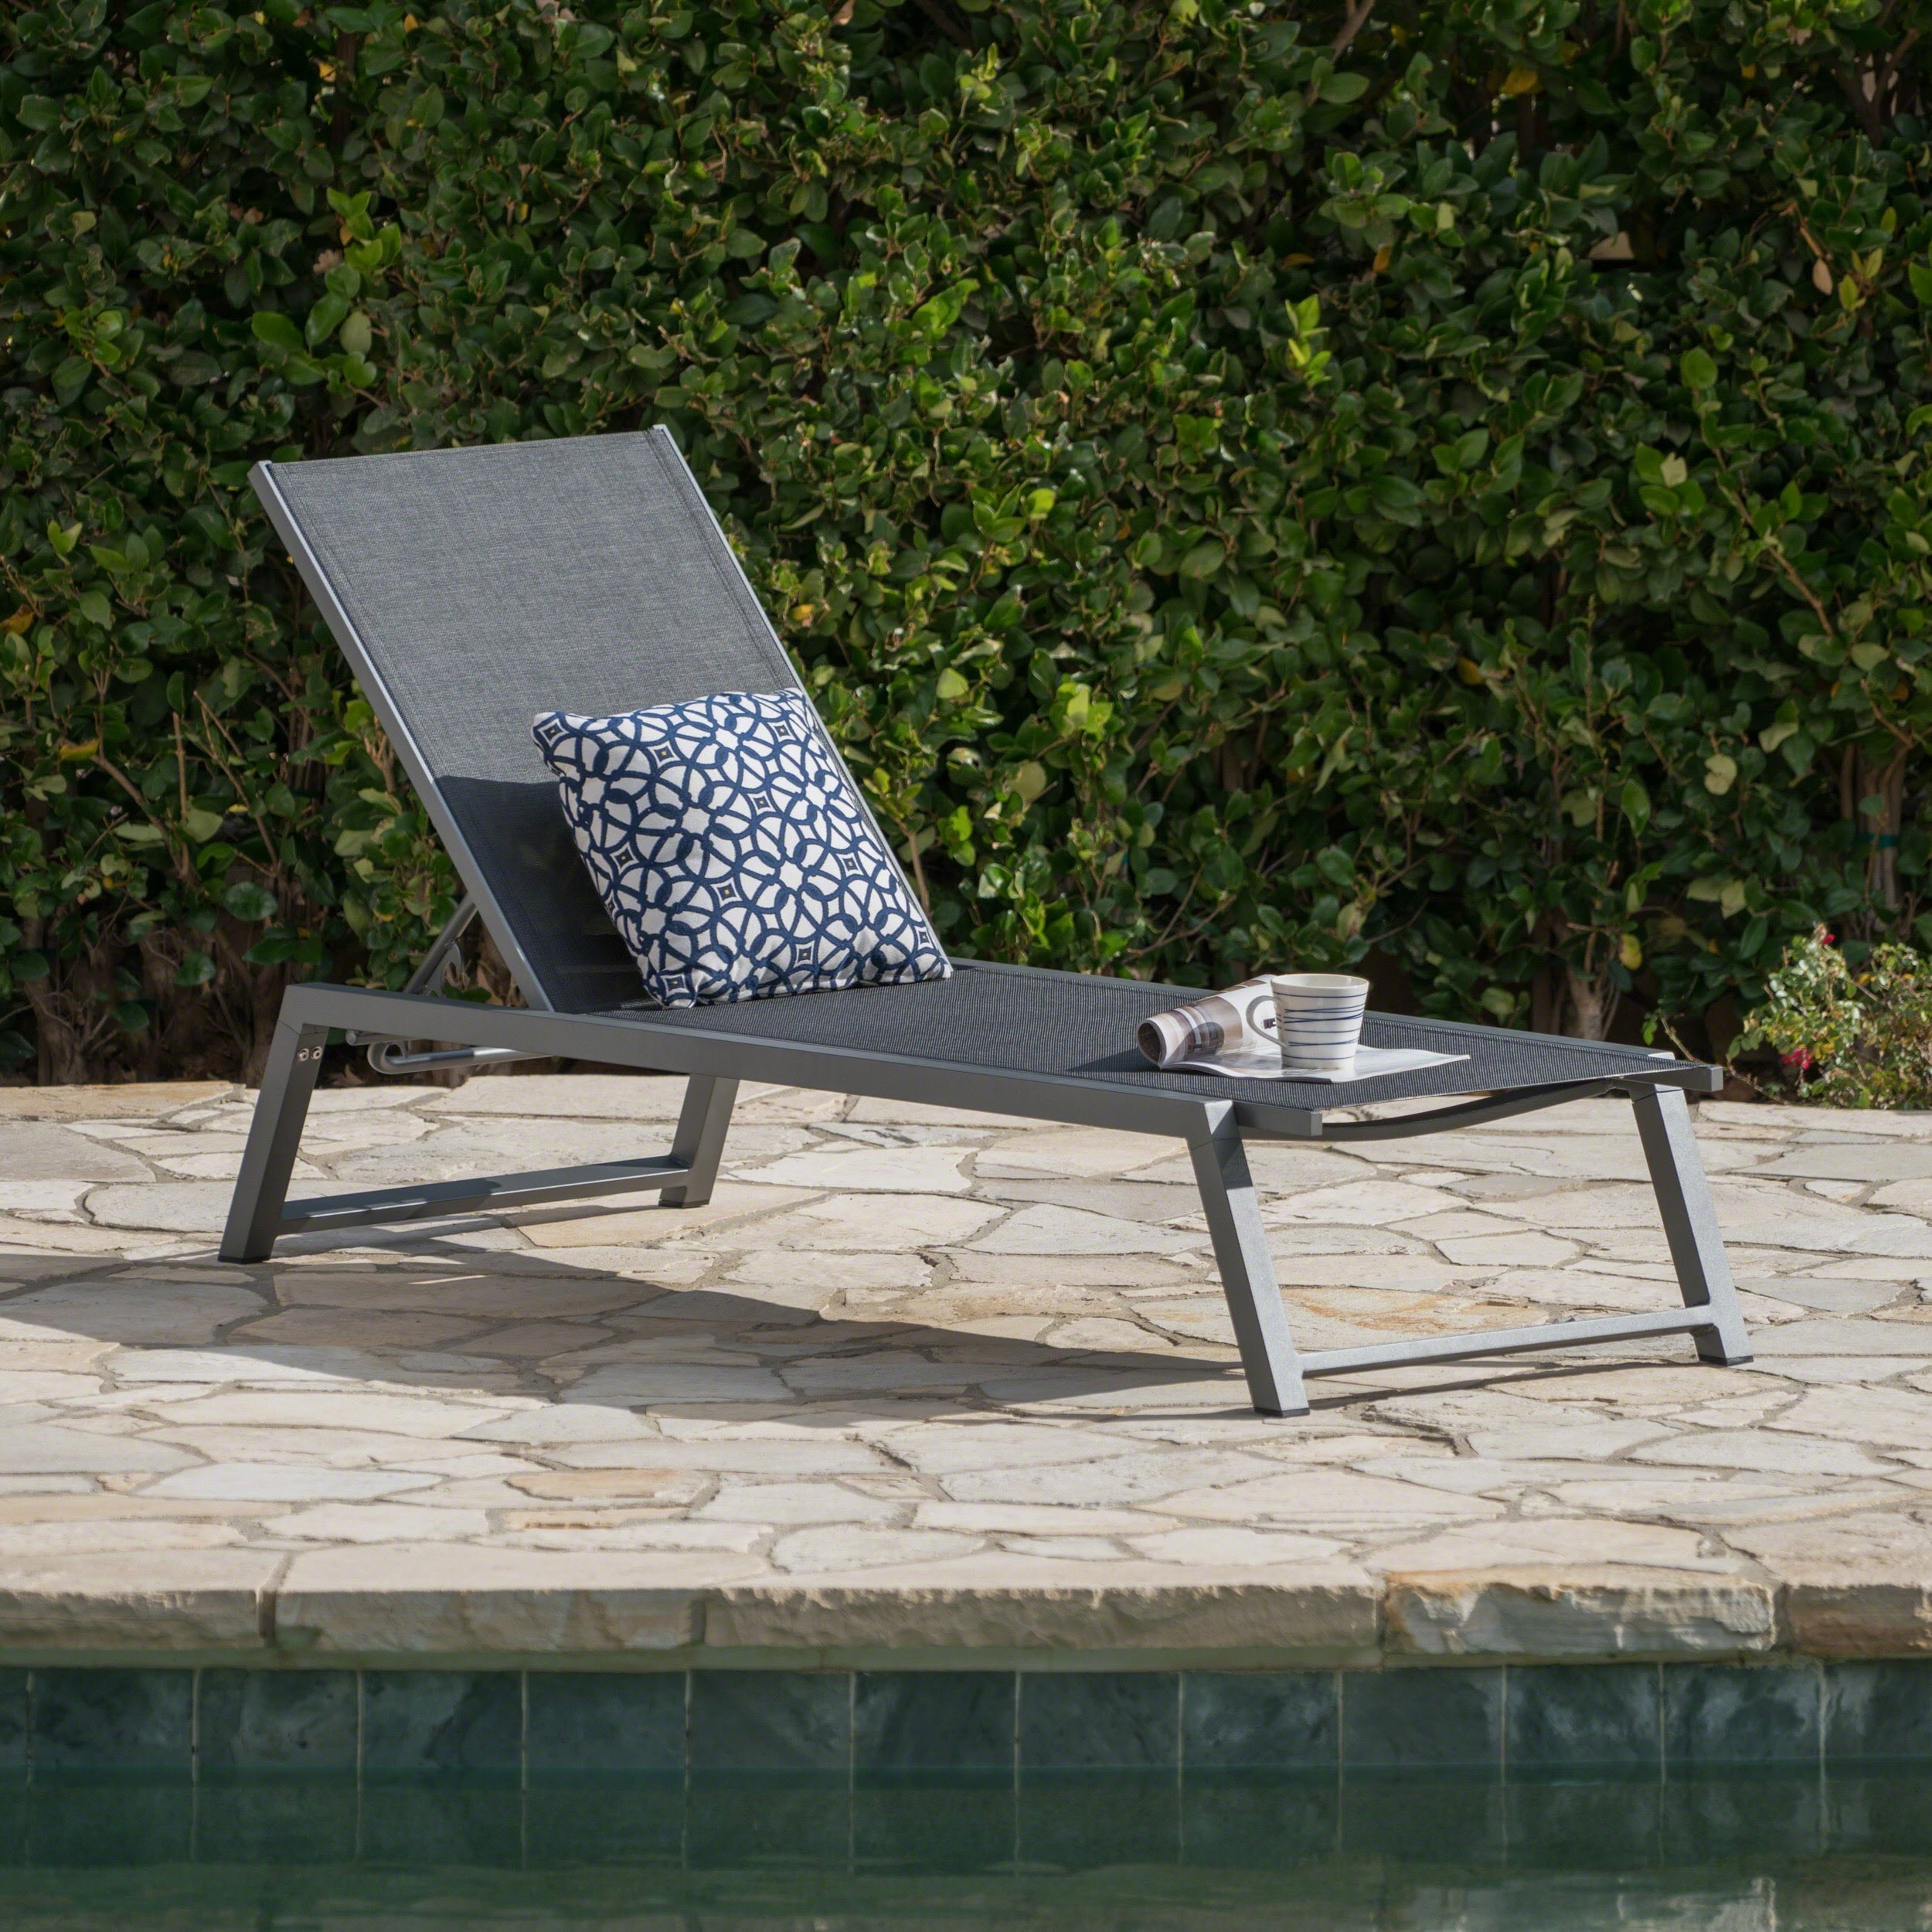 Matthewortile.com Chaise Lounge / The Martin High Chaise Lounge Chairs